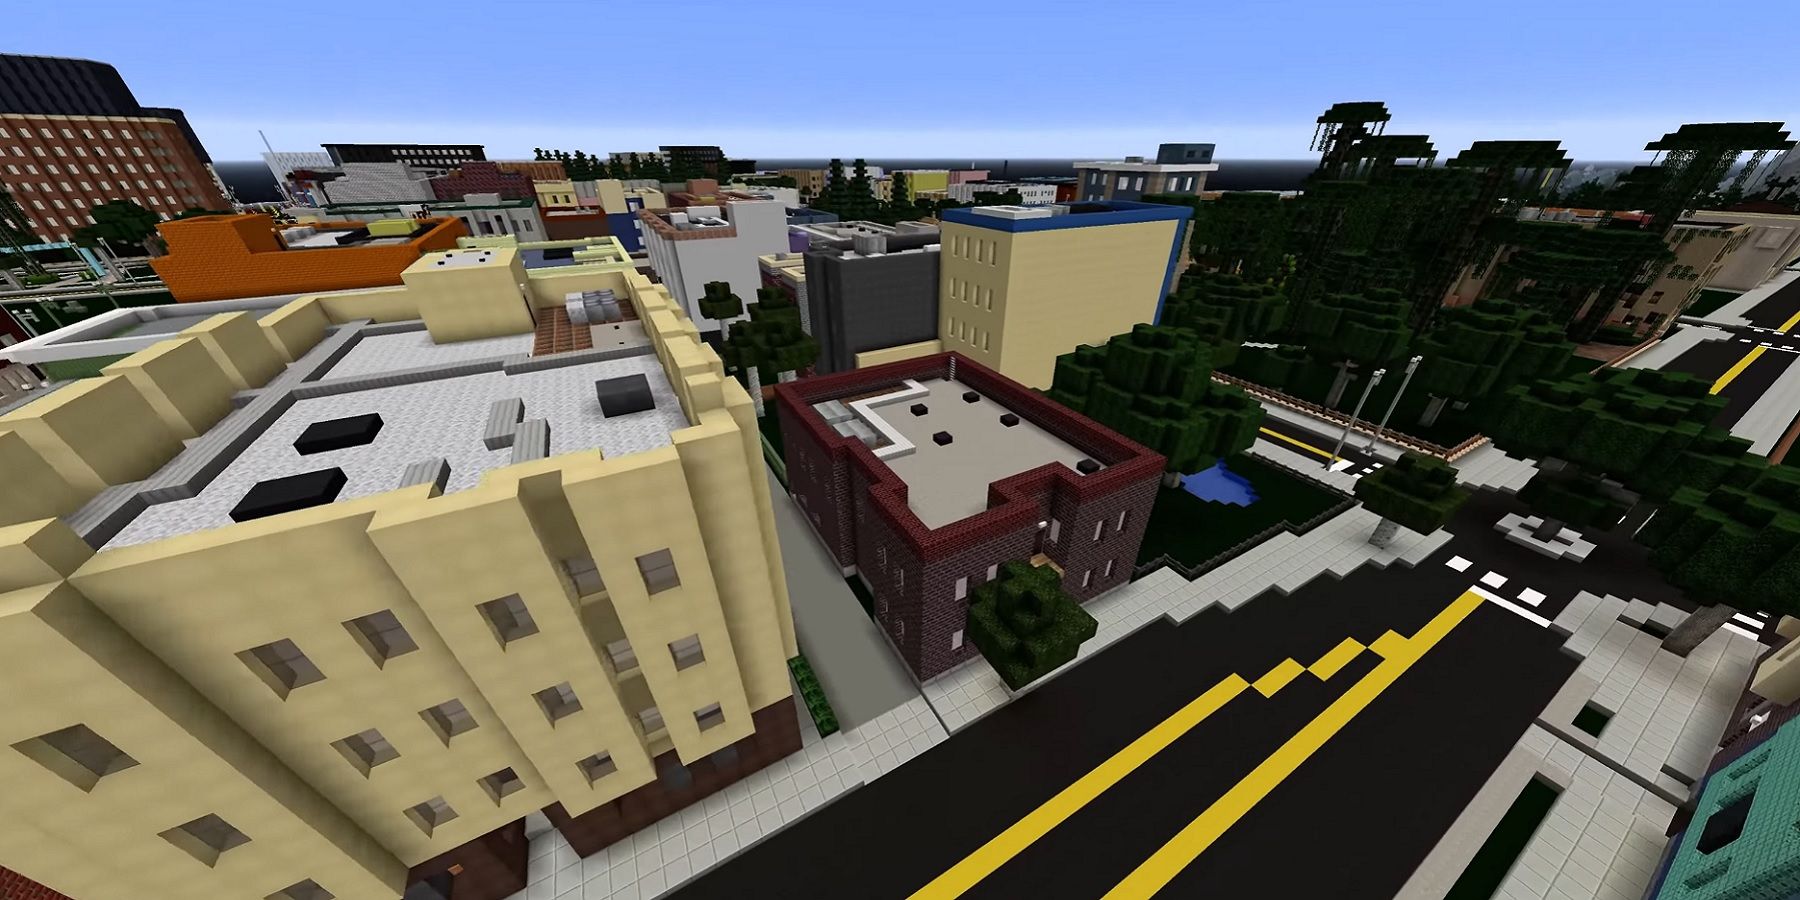 Image from Minecraft showing a city that's been built by a user.